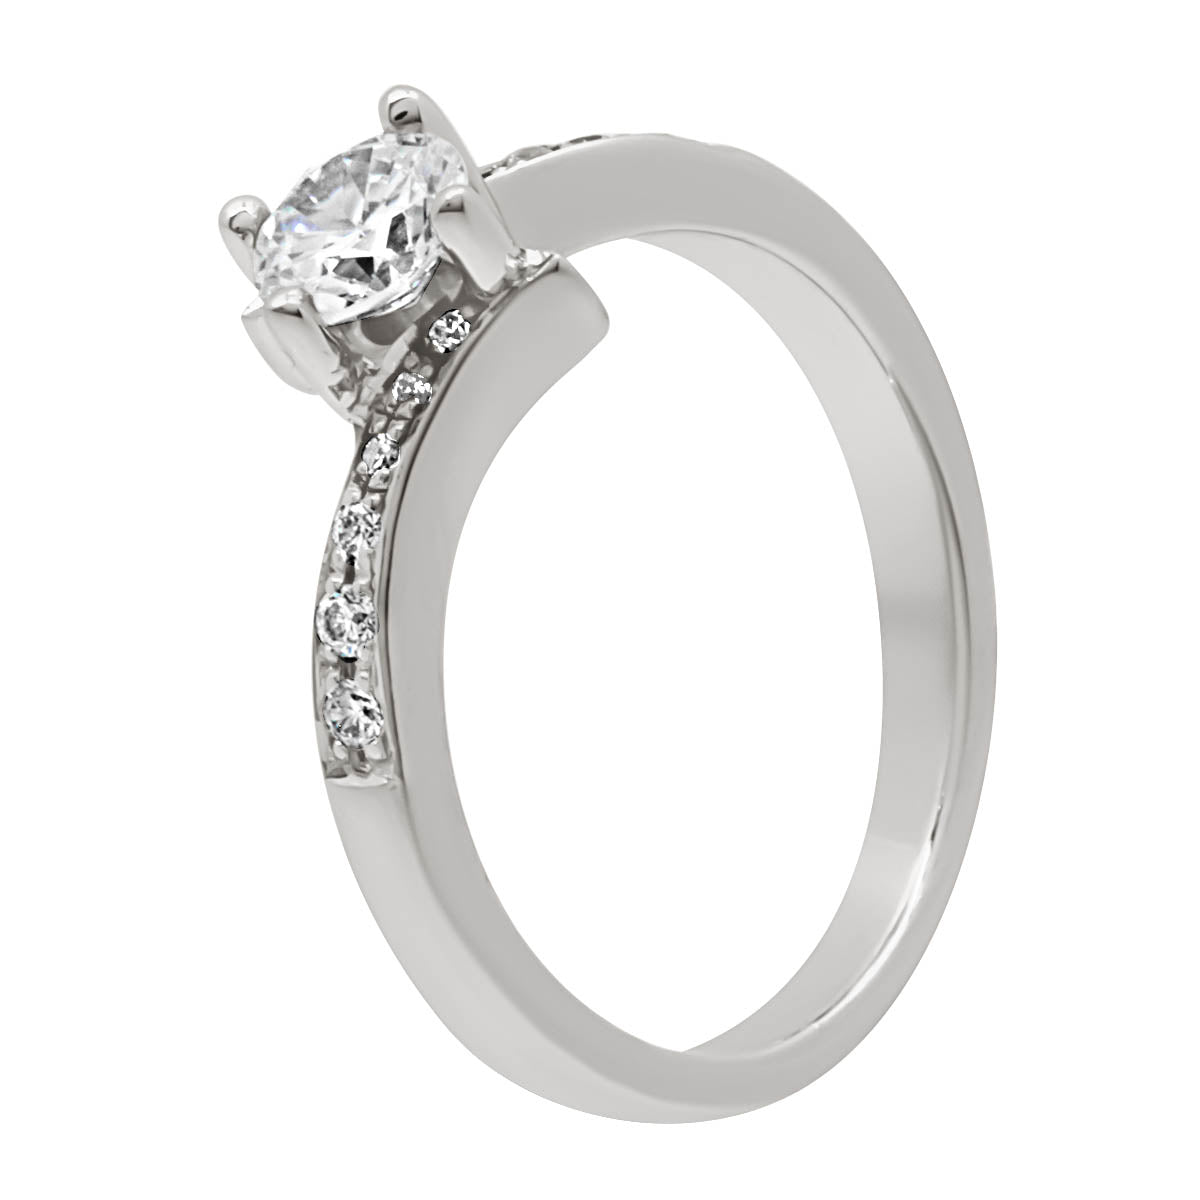 Quirky Diamond Engagement Ring in platinum at an upright angled position